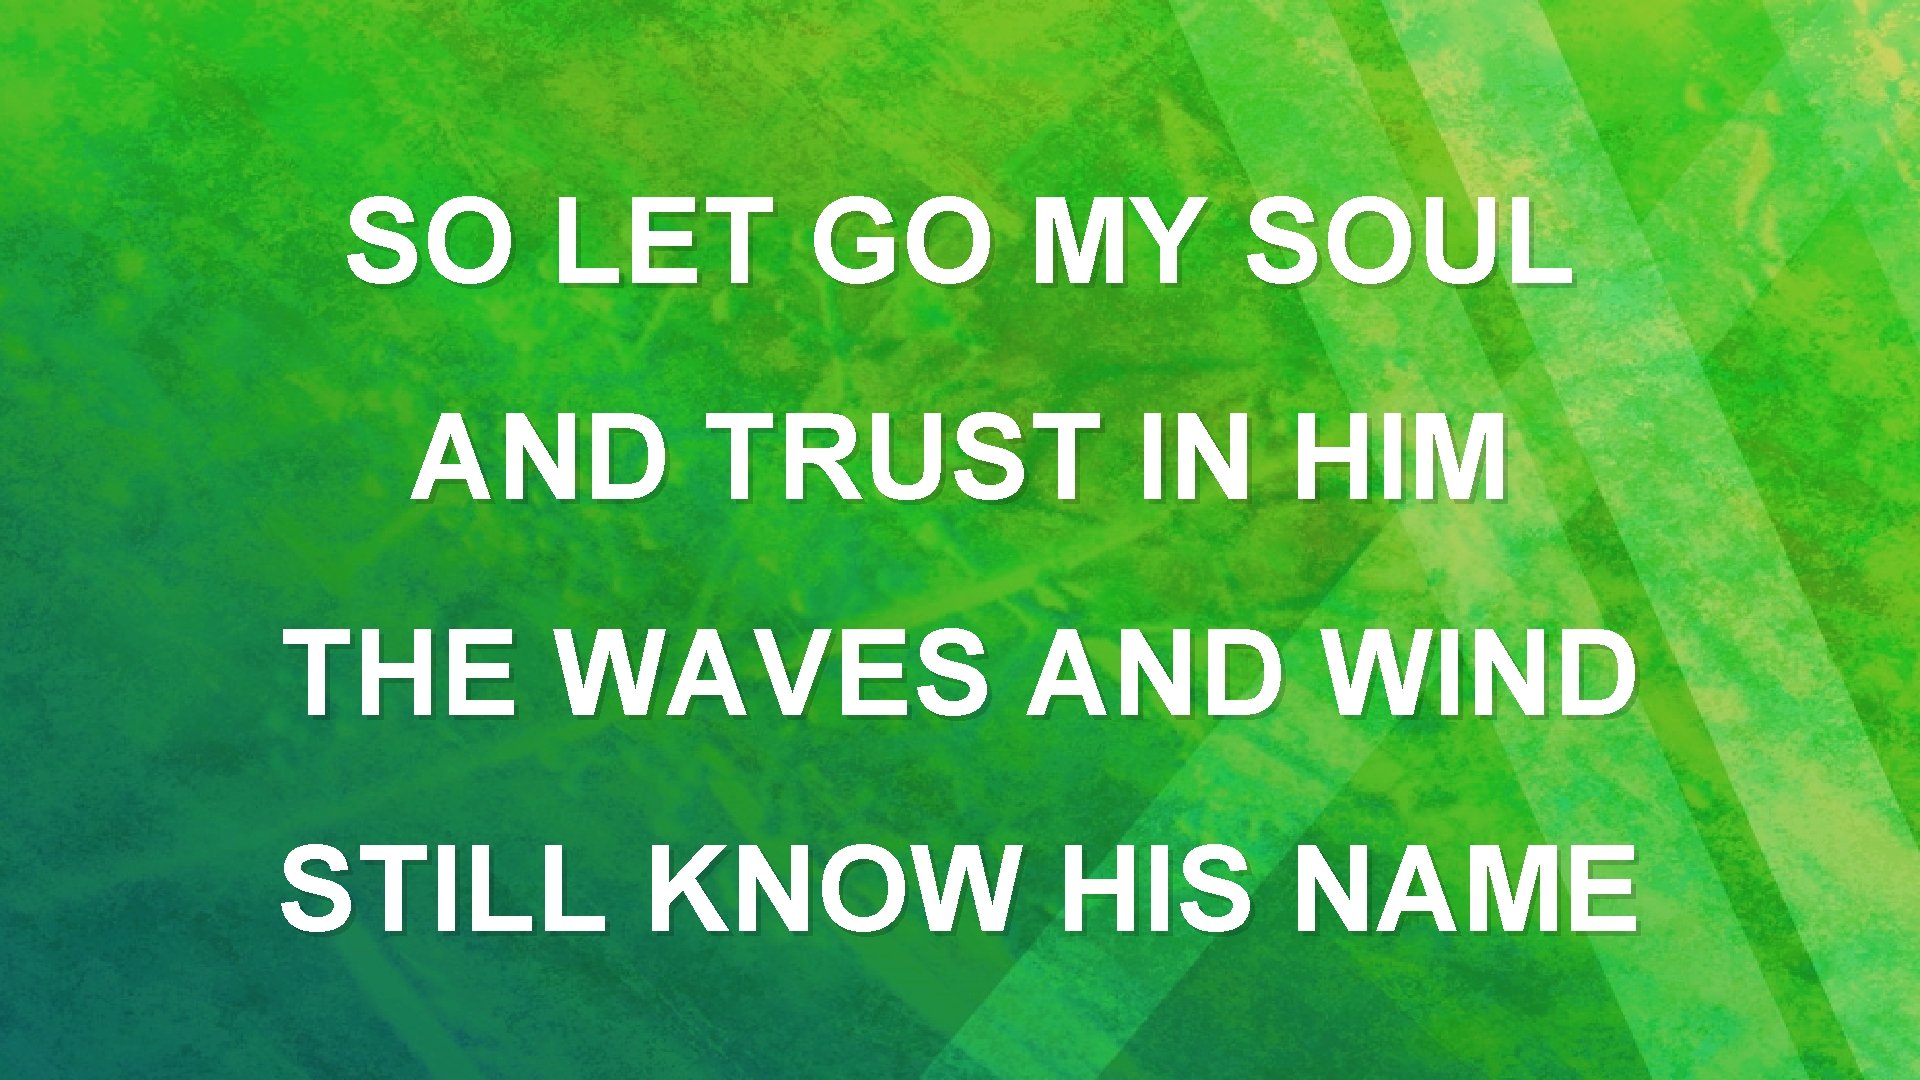 SO LET GO MY SOUL AND TRUST IN HIM THE WAVES AND WIND STILL